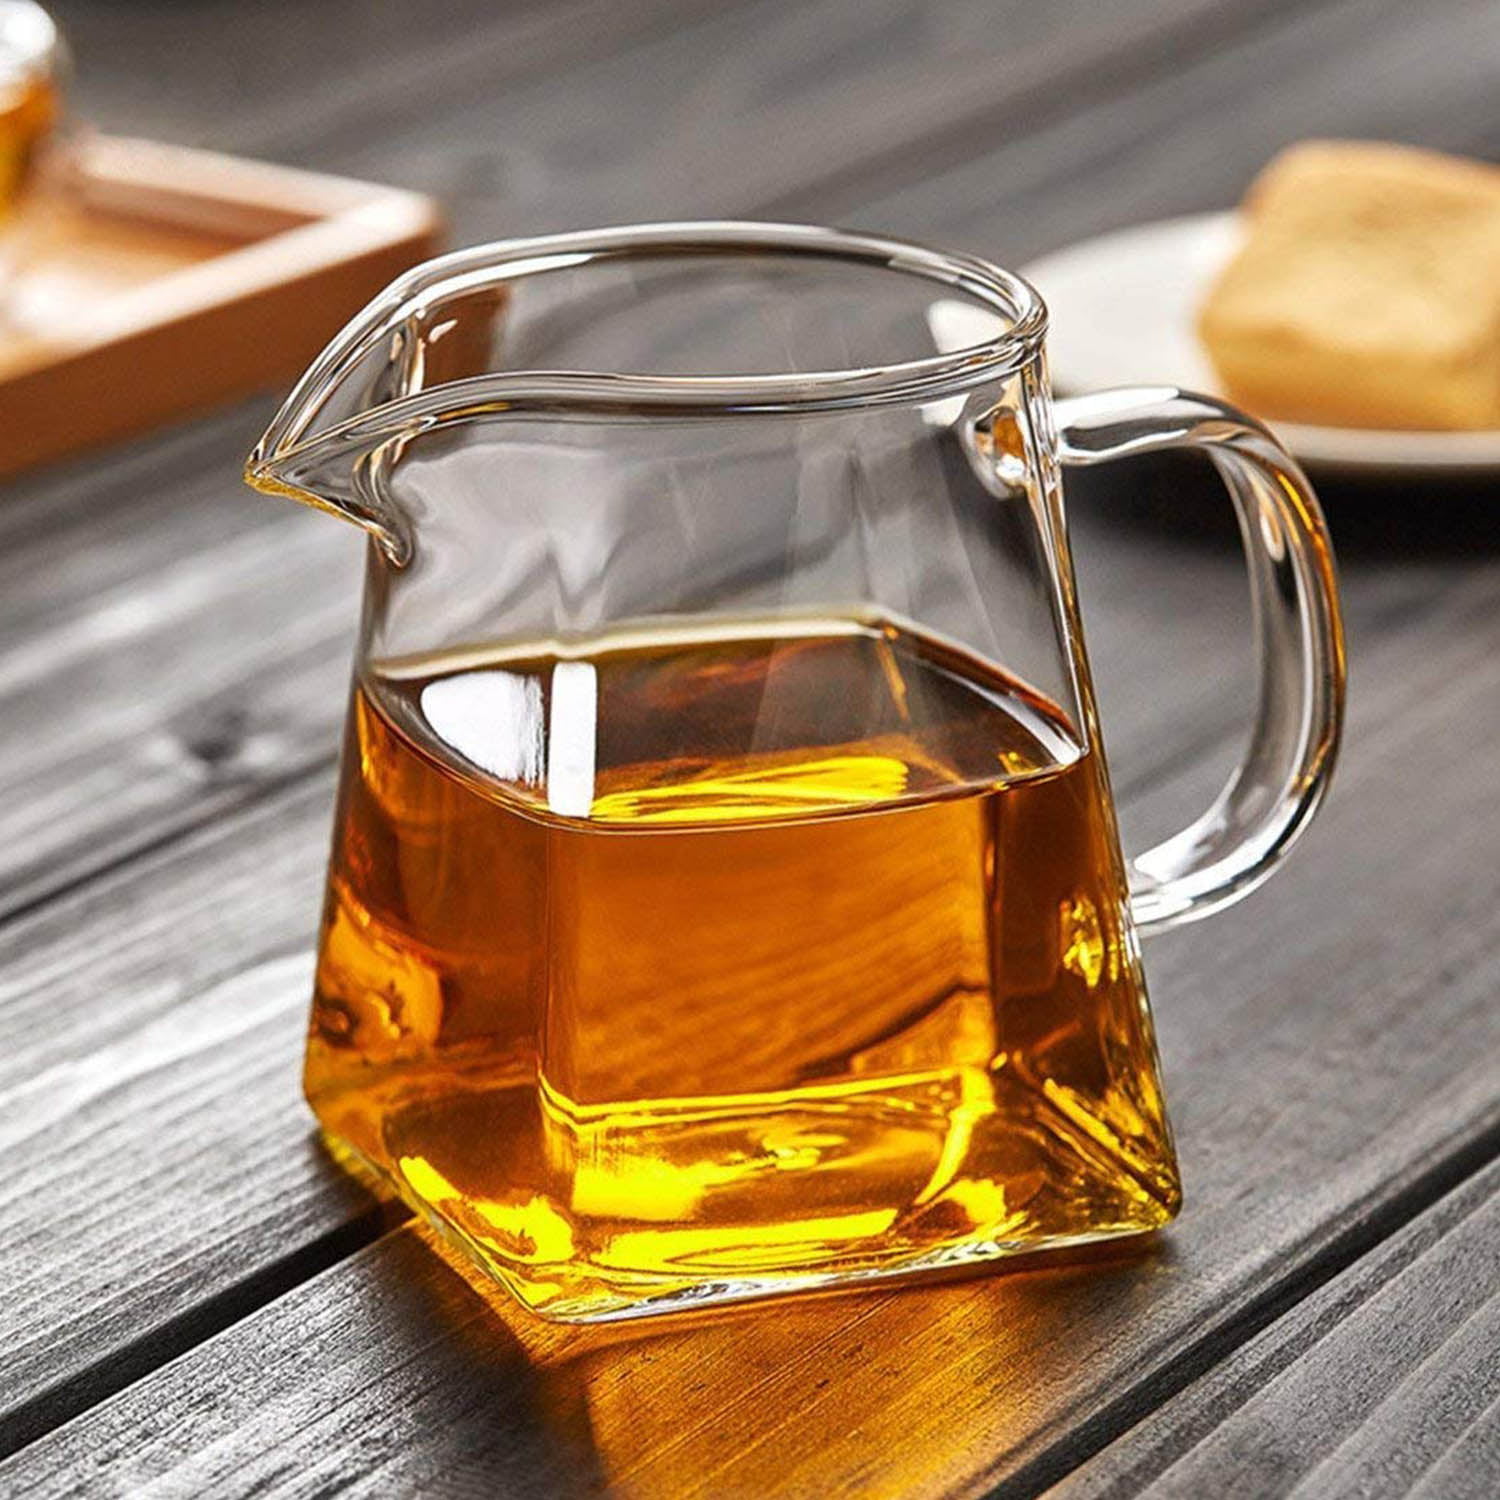 25 oz Tempered Glass Teapot Hot Tea Maker with Stainless Steel Infuser US  Seller